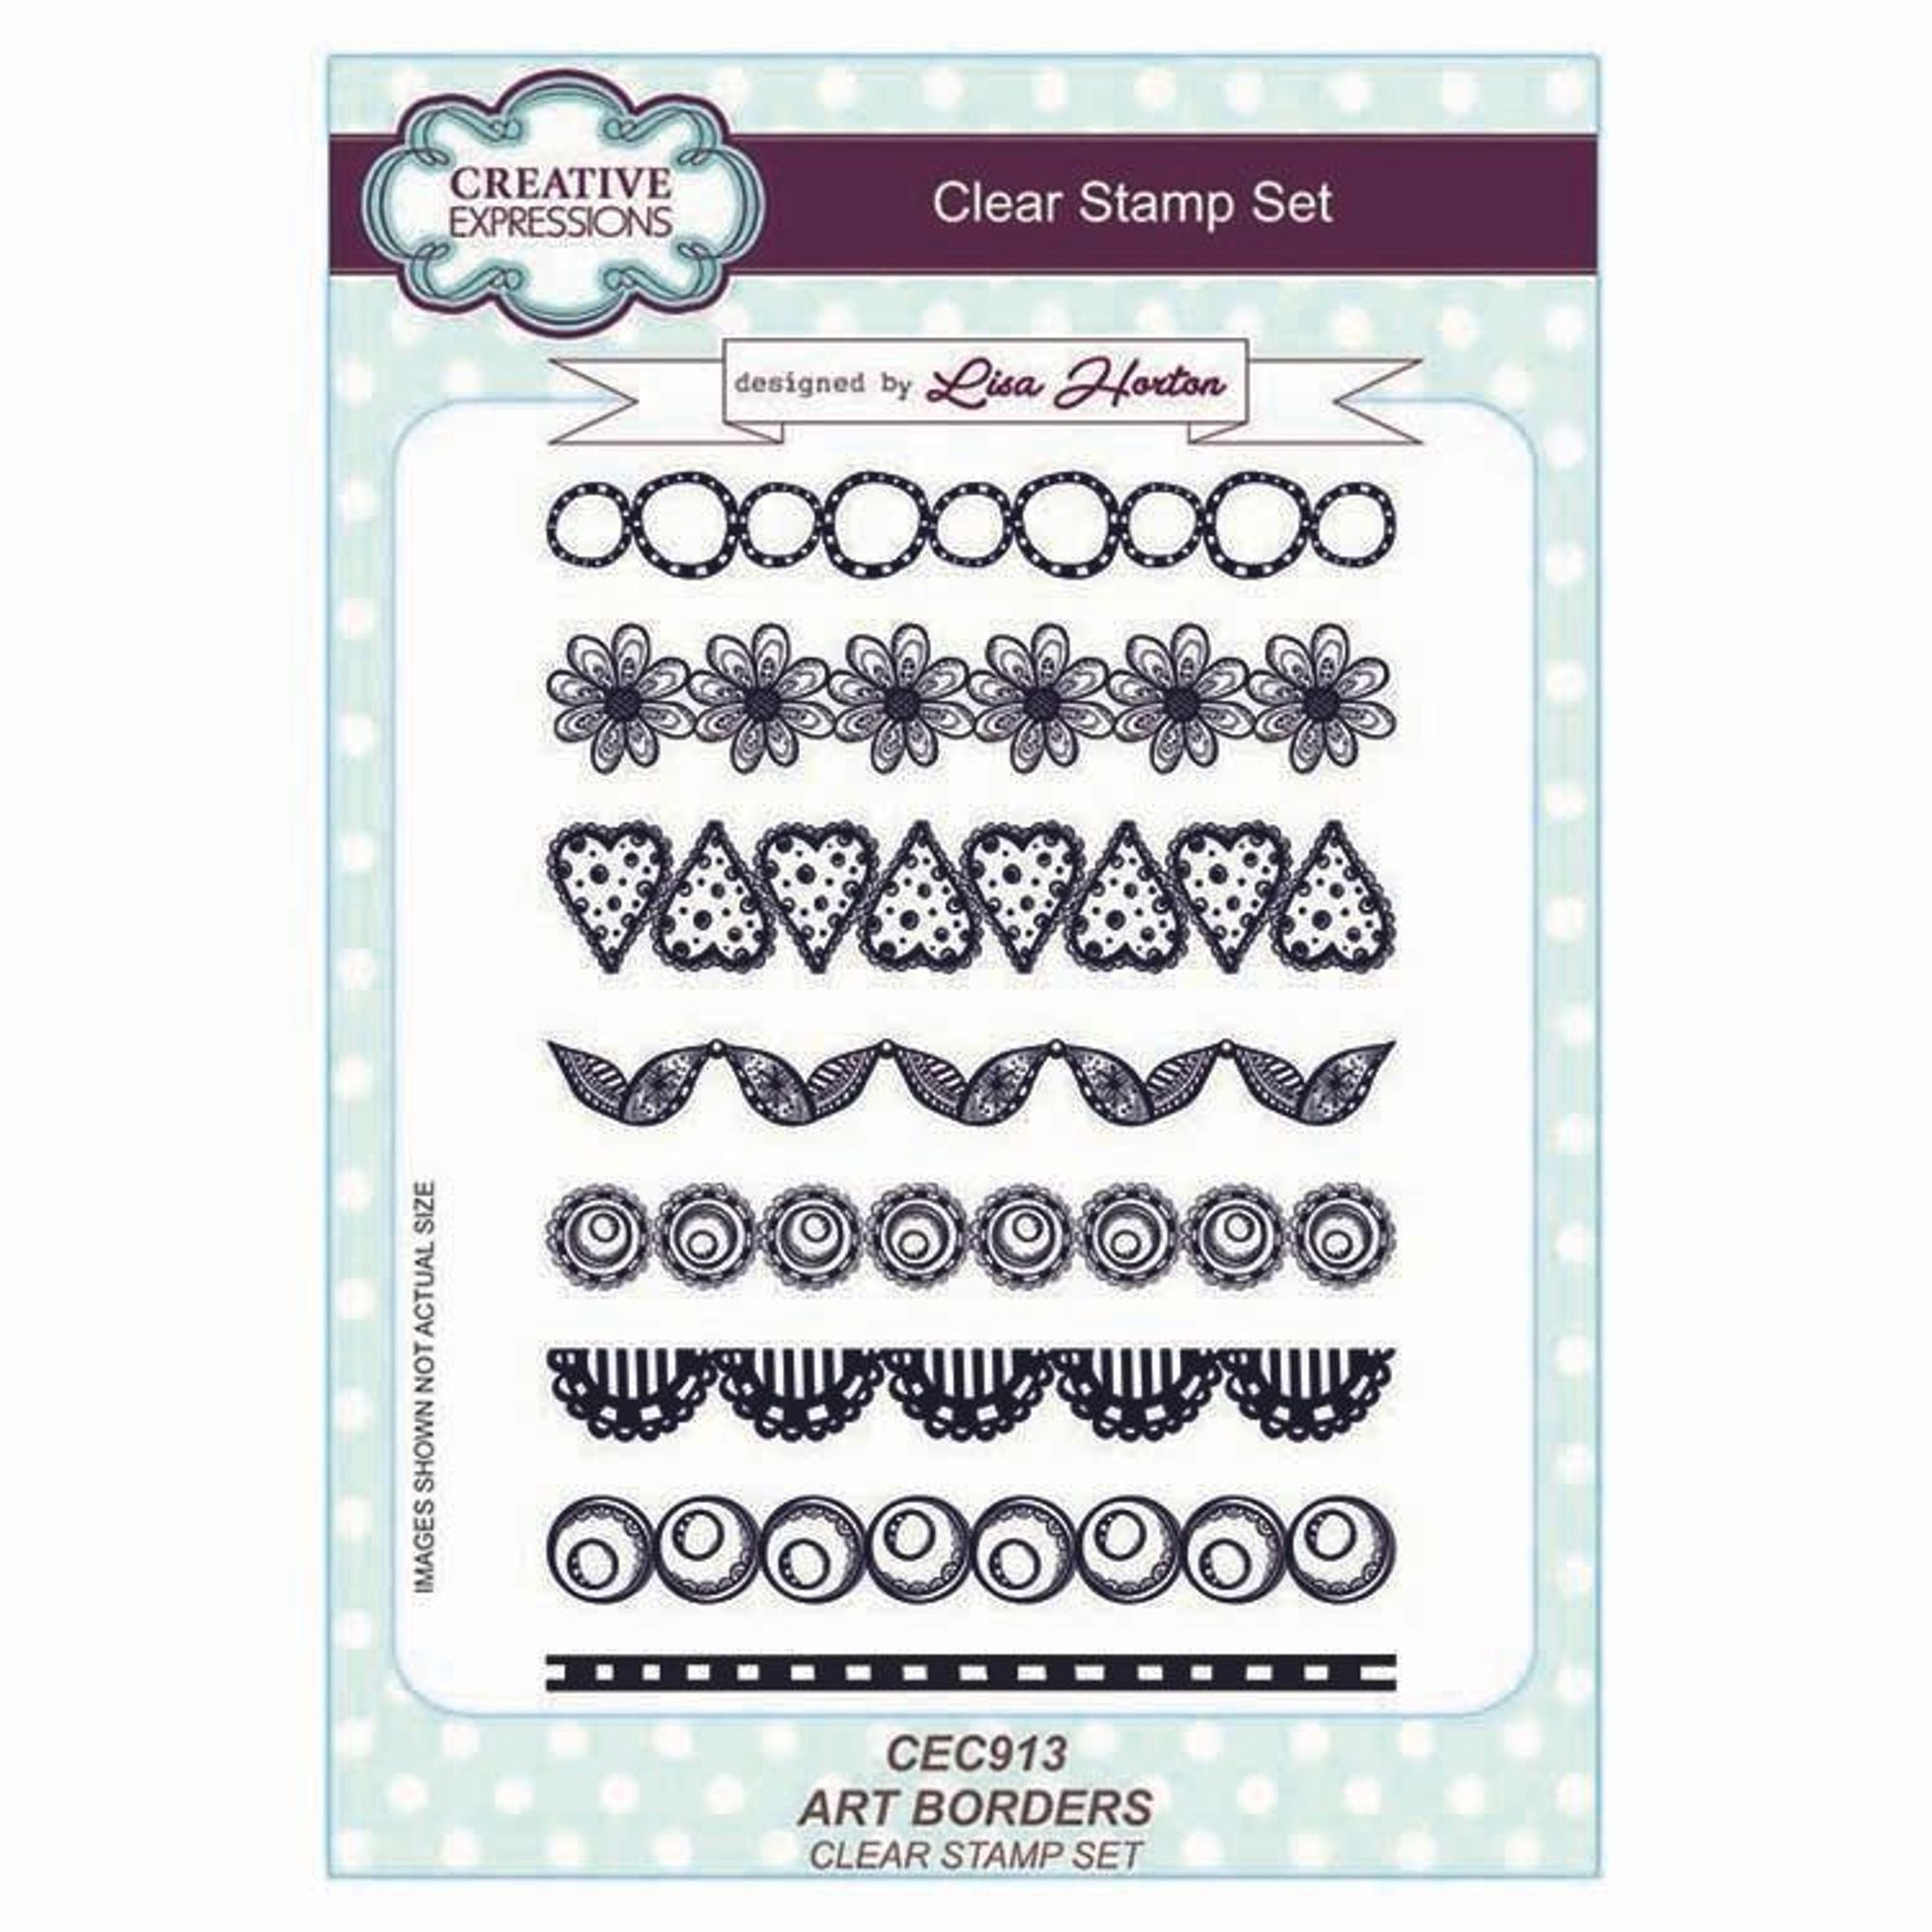 Creative Expressions Art Borders A5 Clear Stamp Set